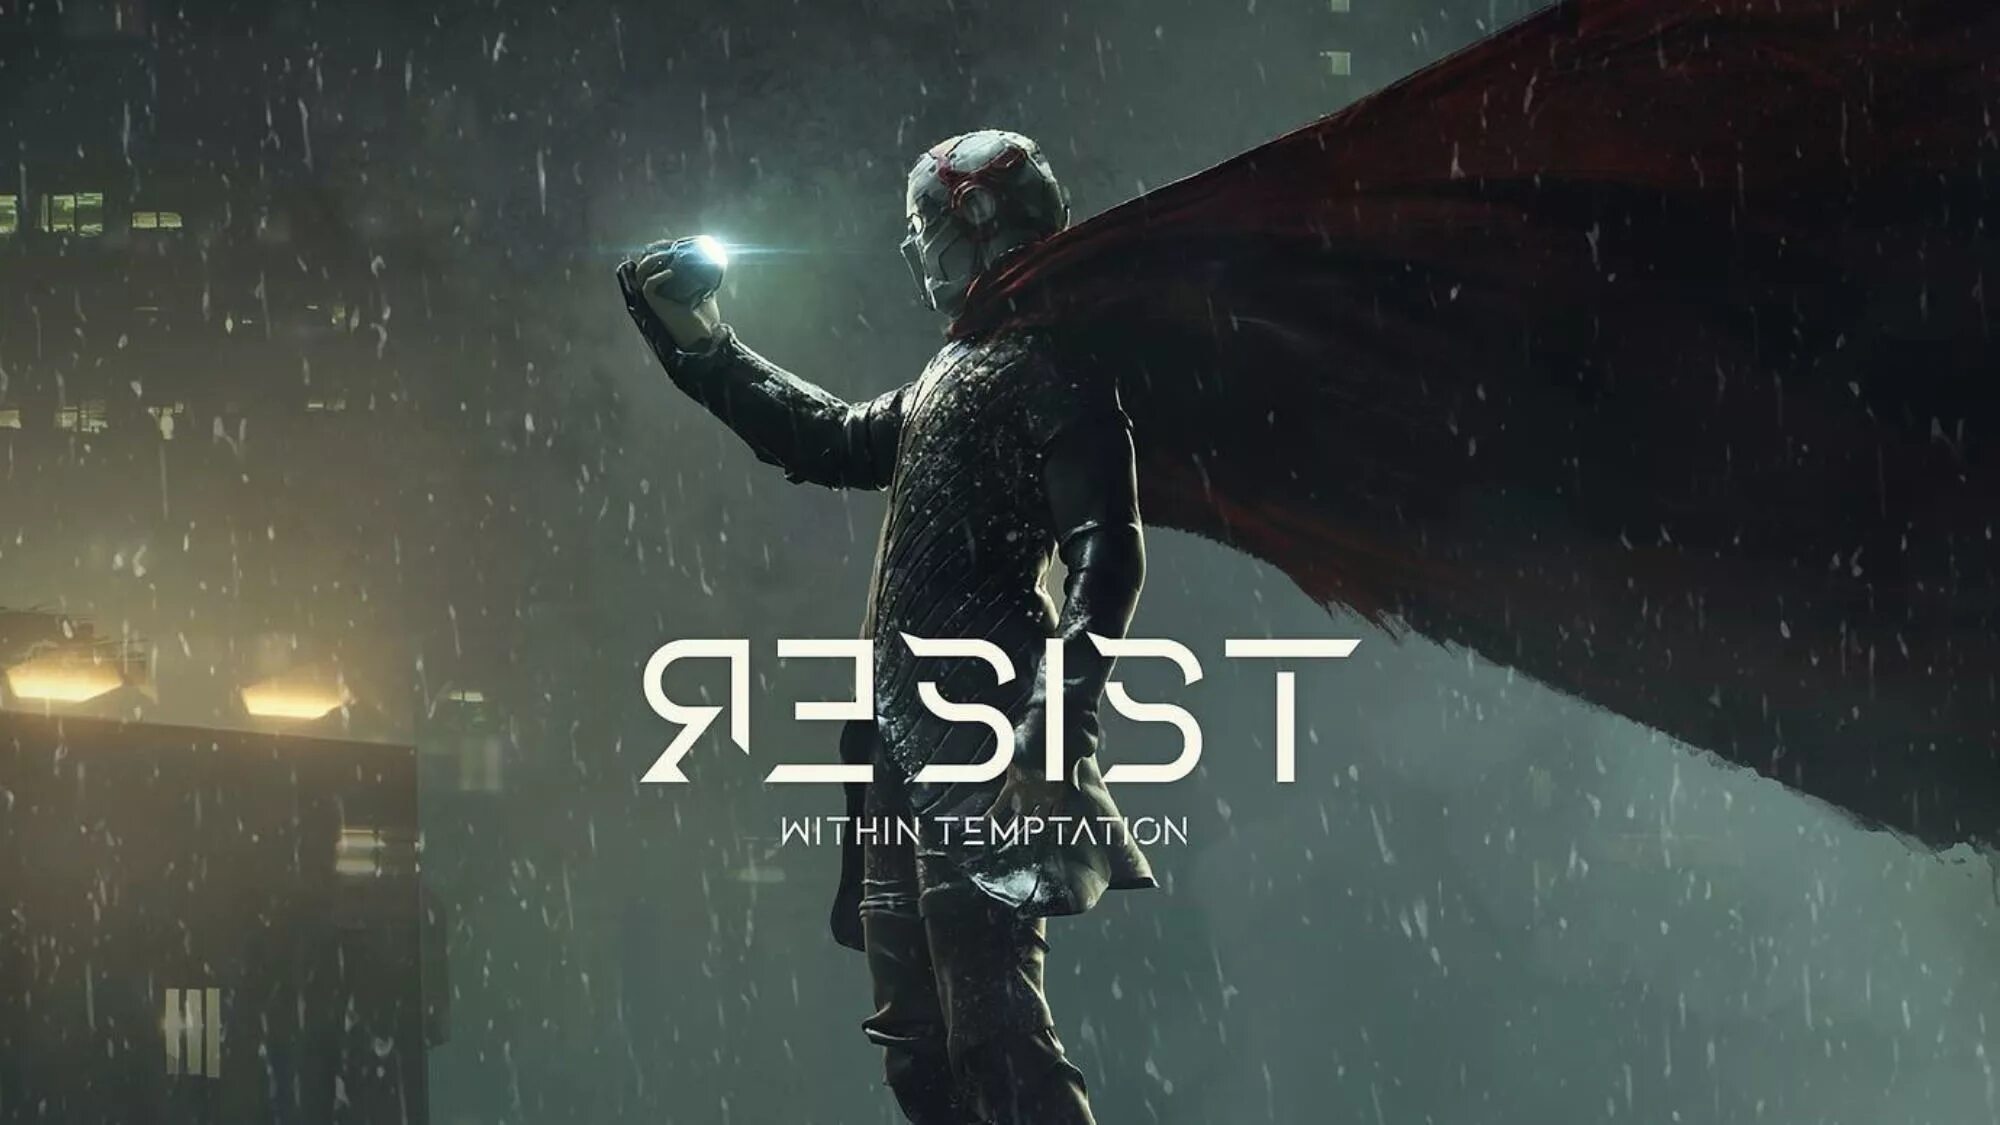 Within temptation альбомы. Within Temptation 2019. Within Temptation albums. Within Temptation resist обложка. Within Temptation "resist".